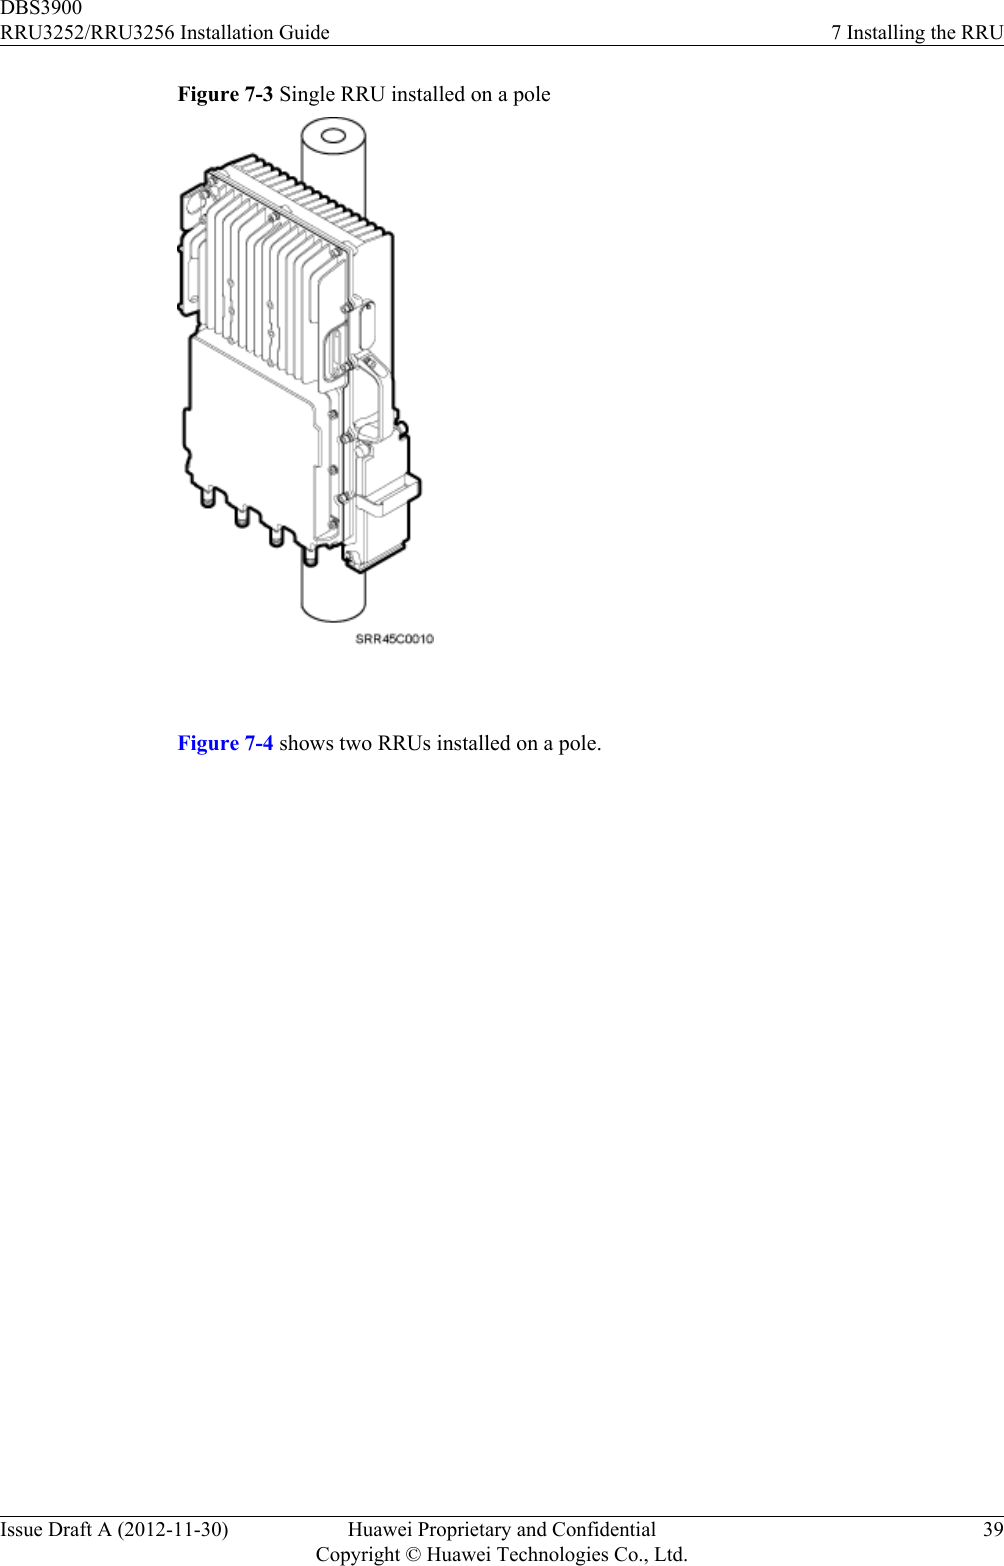 Figure 7-3 Single RRU installed on a pole Figure 7-4 shows two RRUs installed on a pole.DBS3900RRU3252/RRU3256 Installation Guide 7 Installing the RRUIssue Draft A (2012-11-30) Huawei Proprietary and ConfidentialCopyright © Huawei Technologies Co., Ltd.39